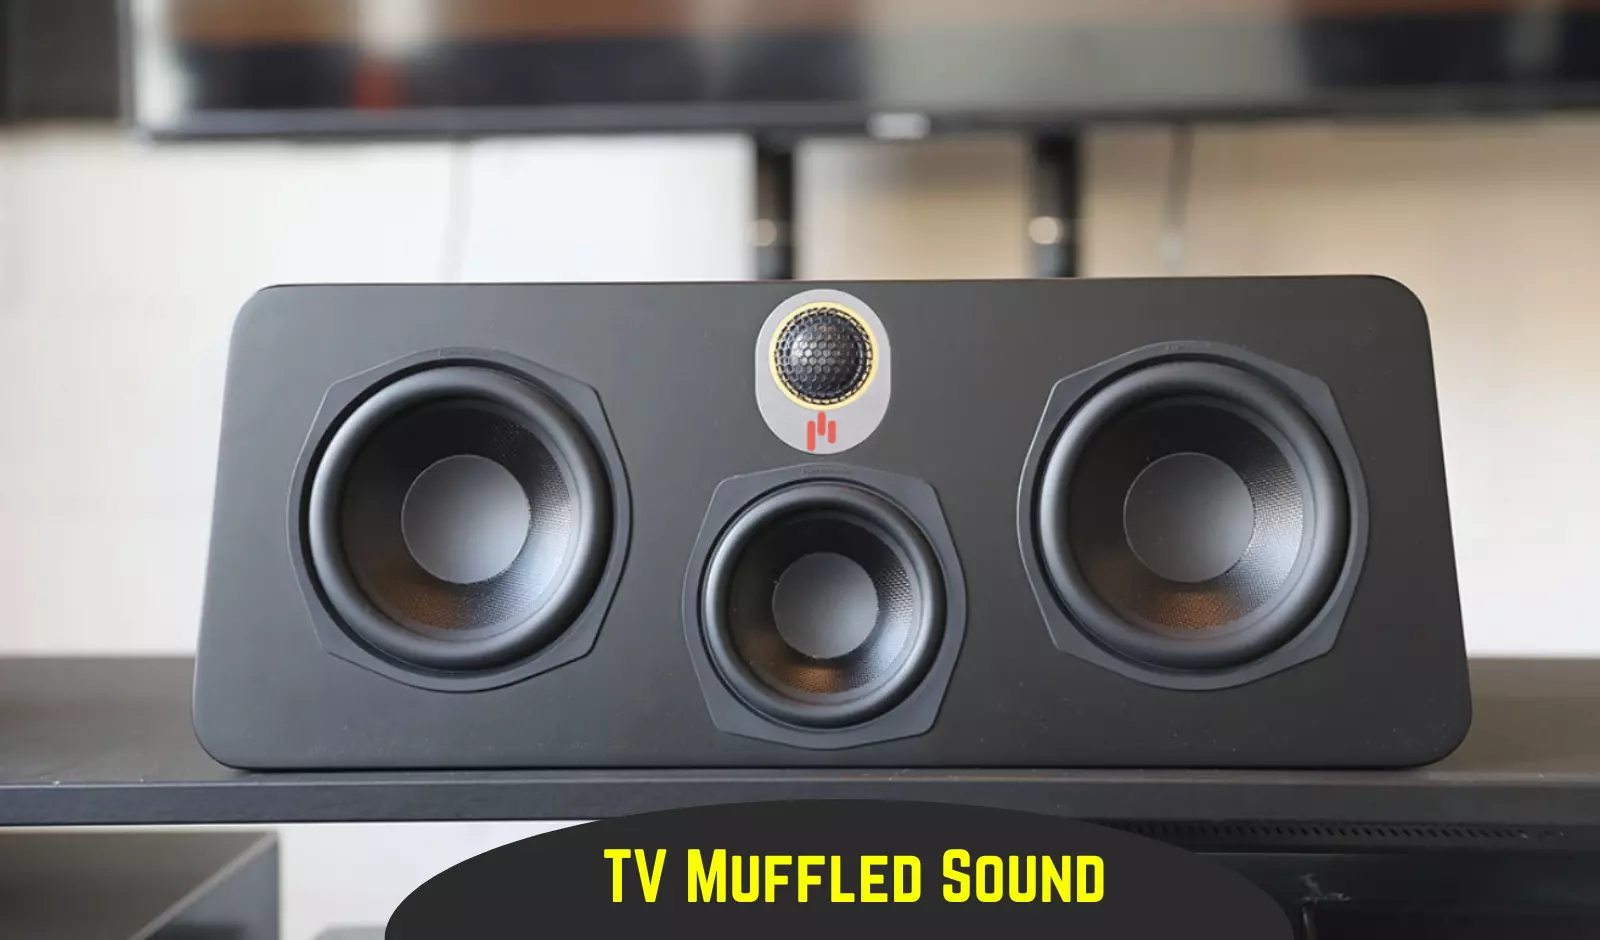 How To Fix Muffled Sound on TV